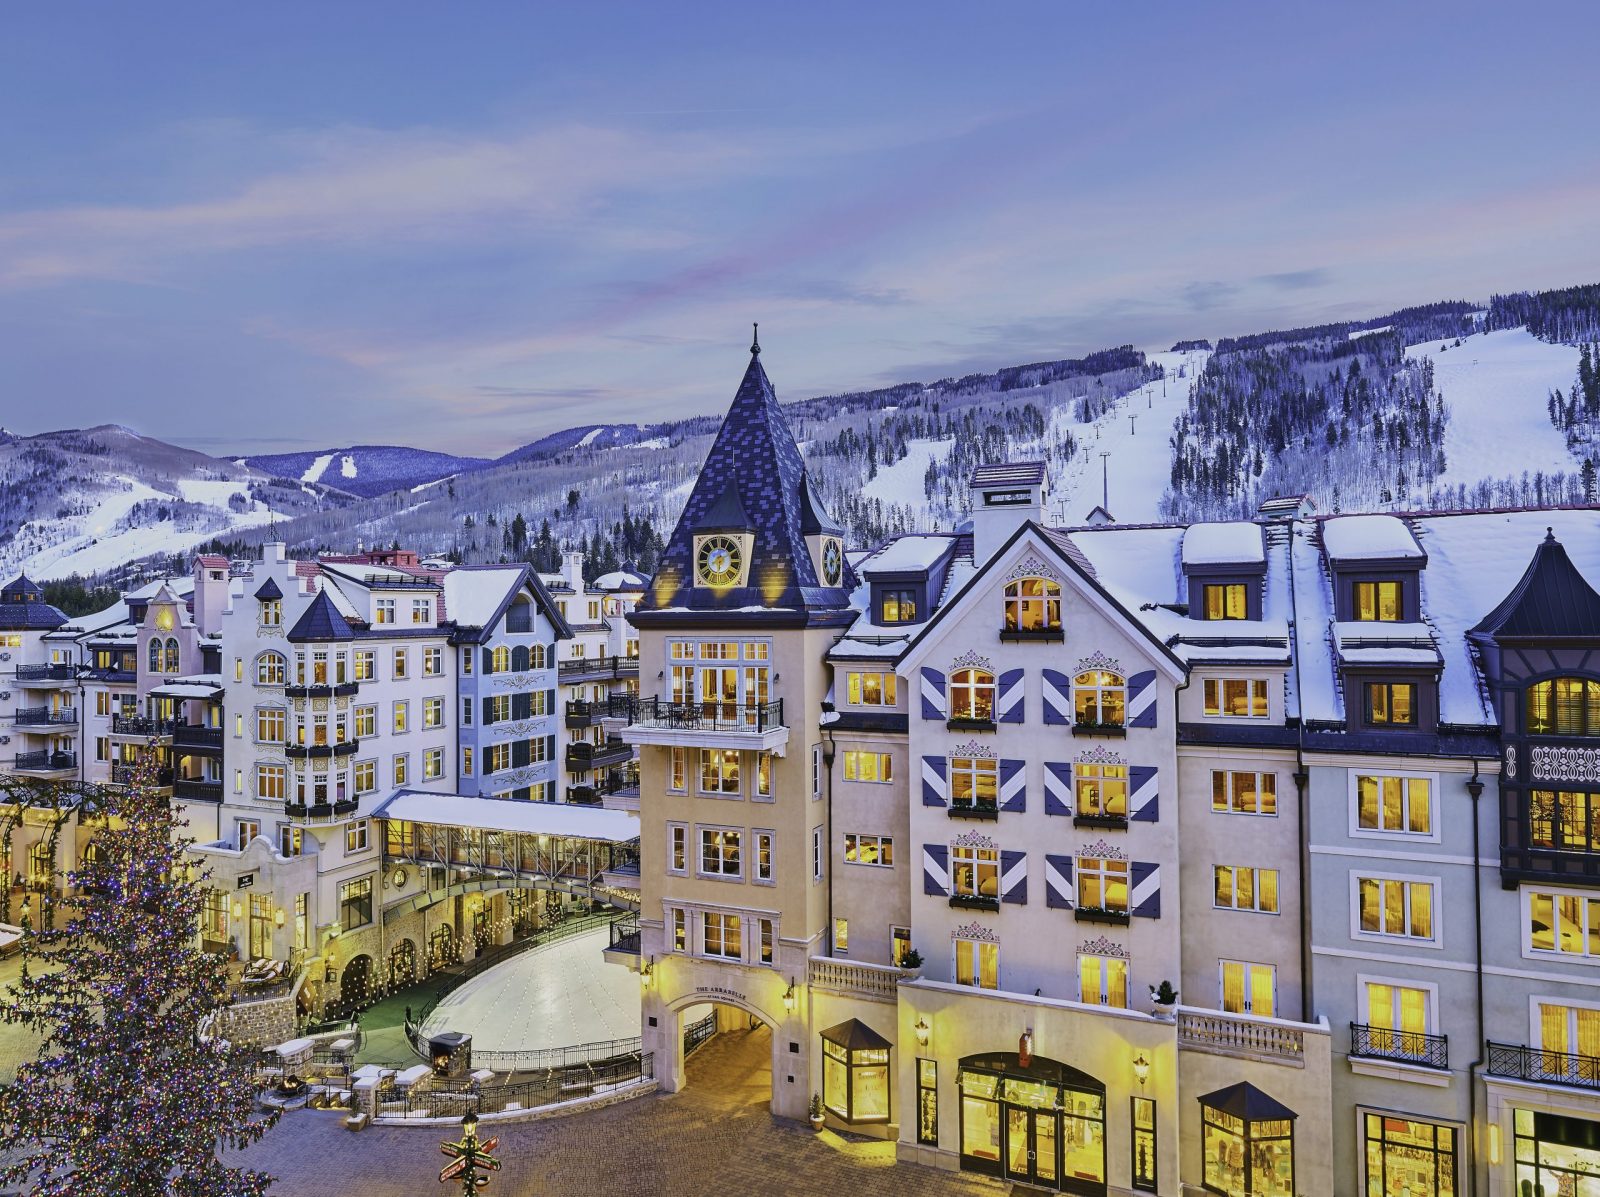 The Arrabelle at Vail Square A Rock Resort Property in Vail, CO. Photo: Vail Resorts. The Must-Read Guide to Vail. Book your stay at the Arrabelle here.